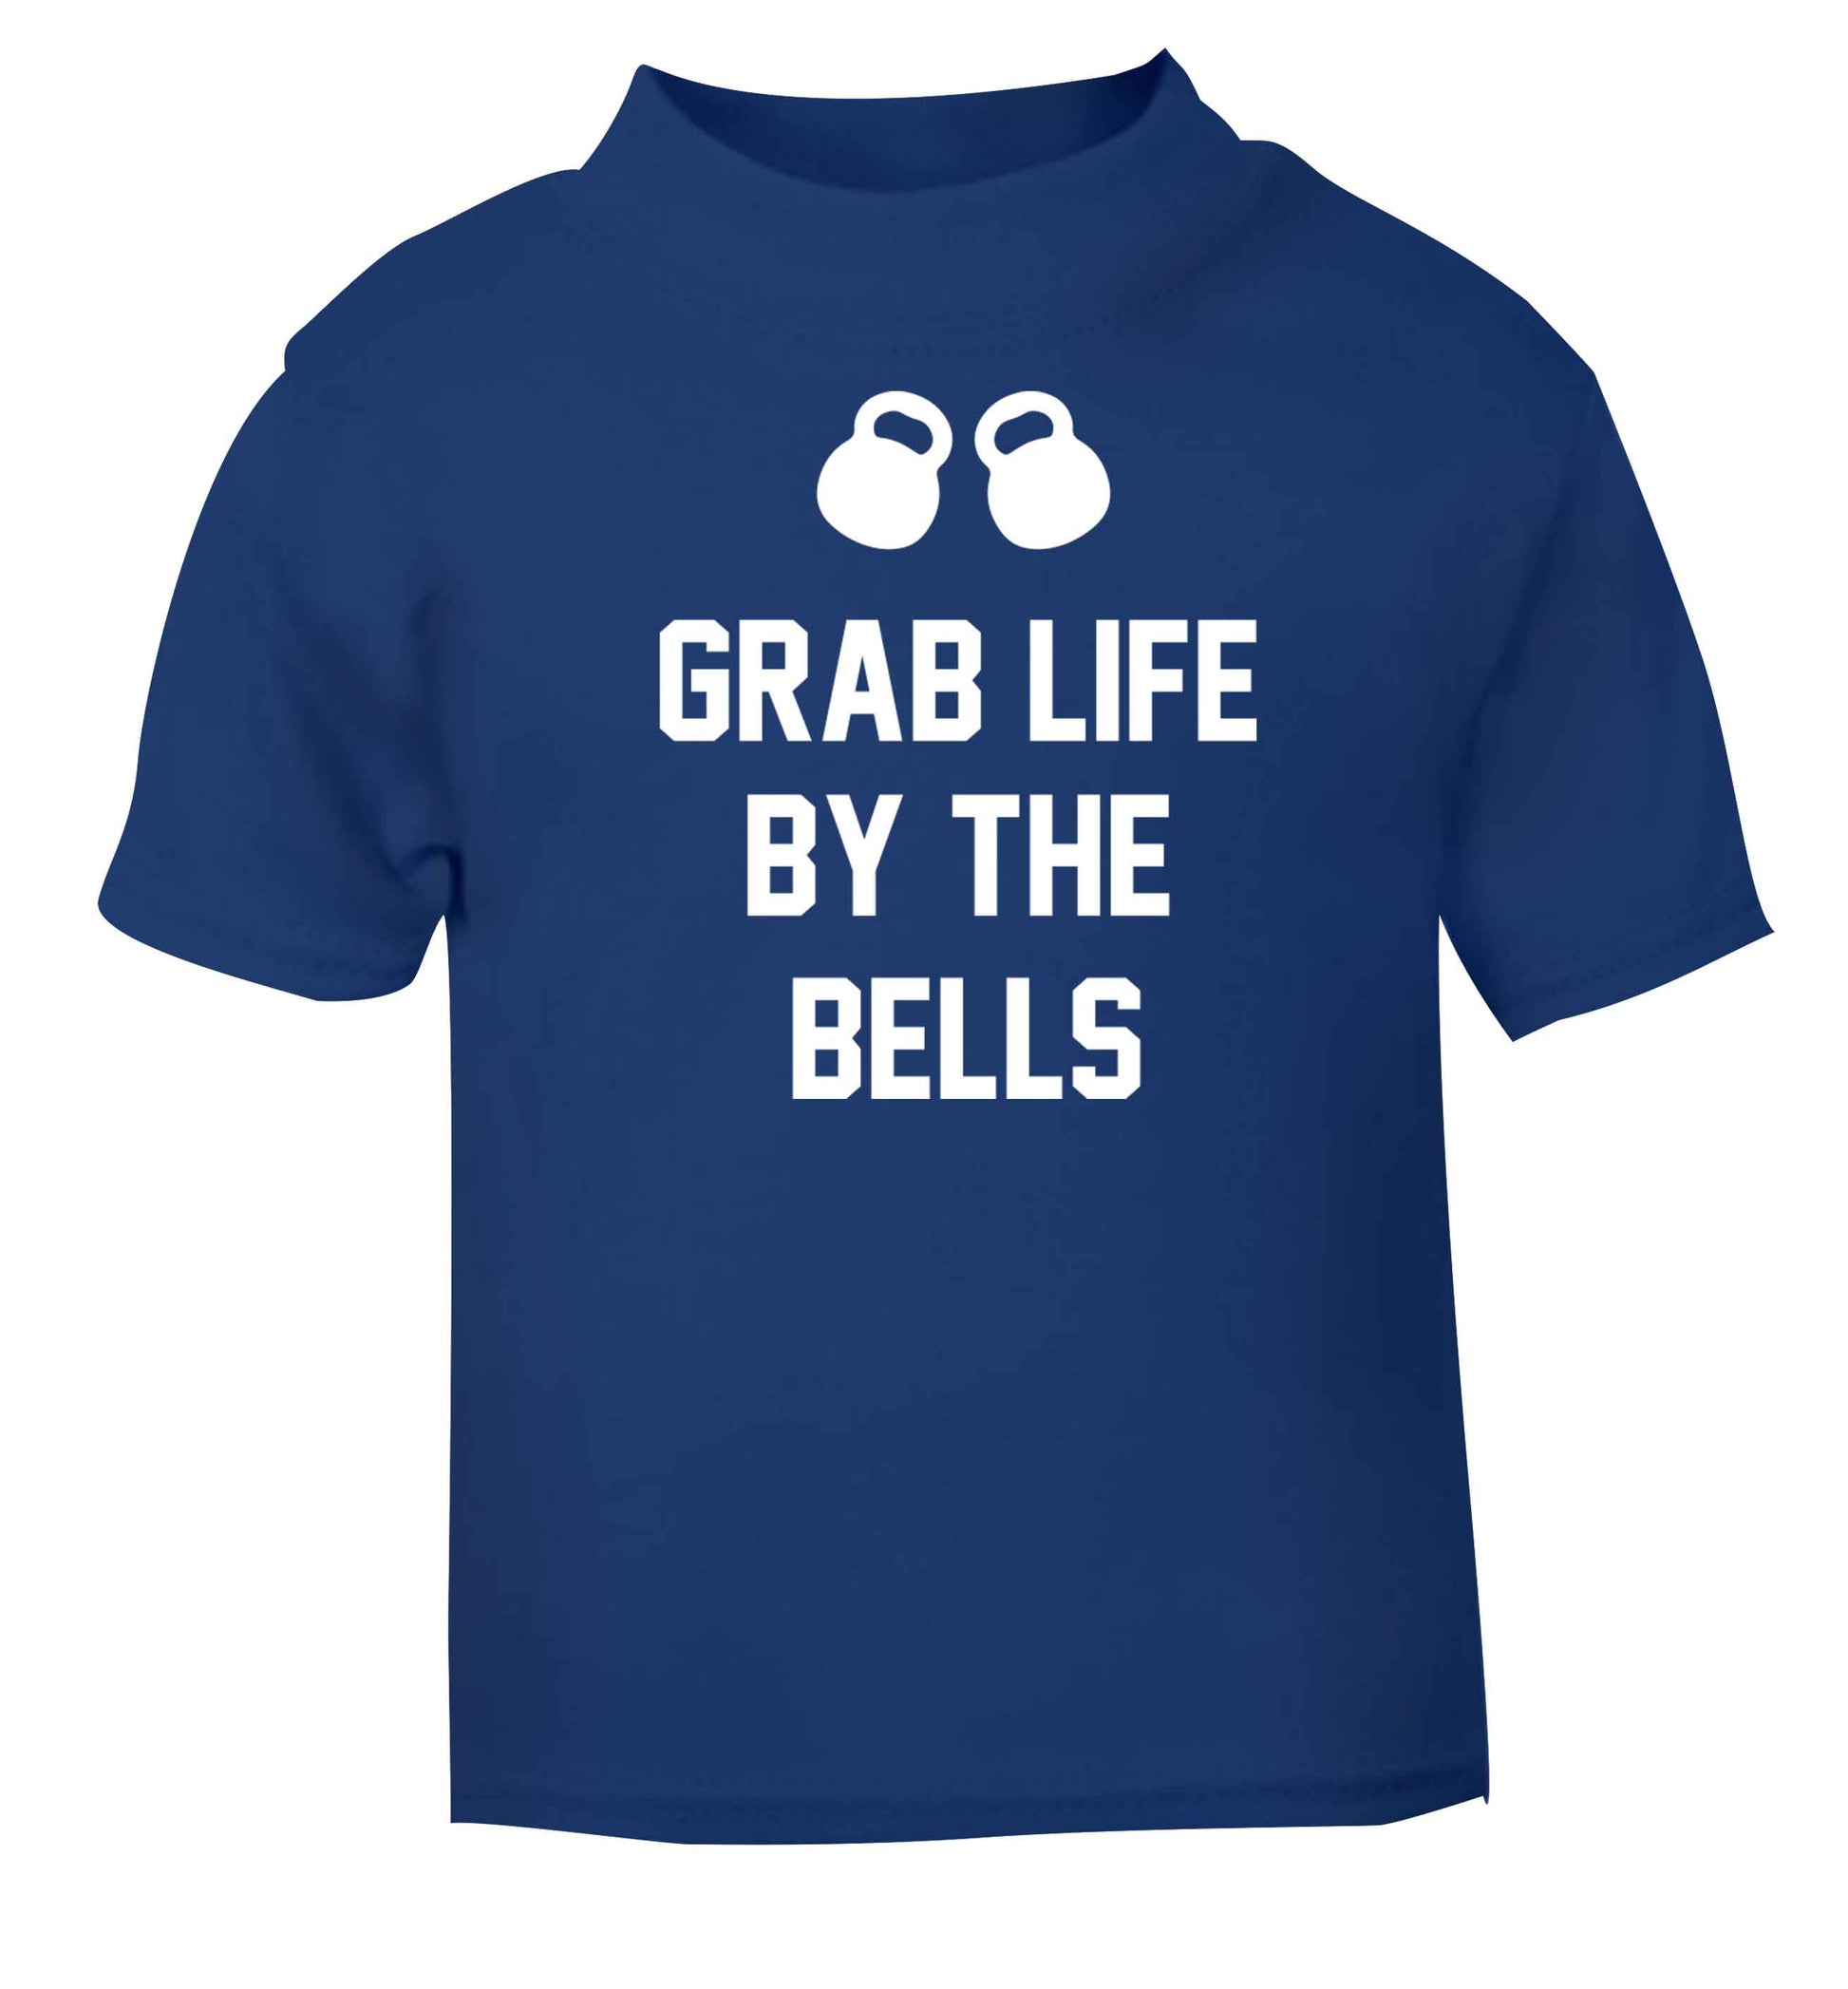 Grab life by the bells blue baby toddler Tshirt 2 Years